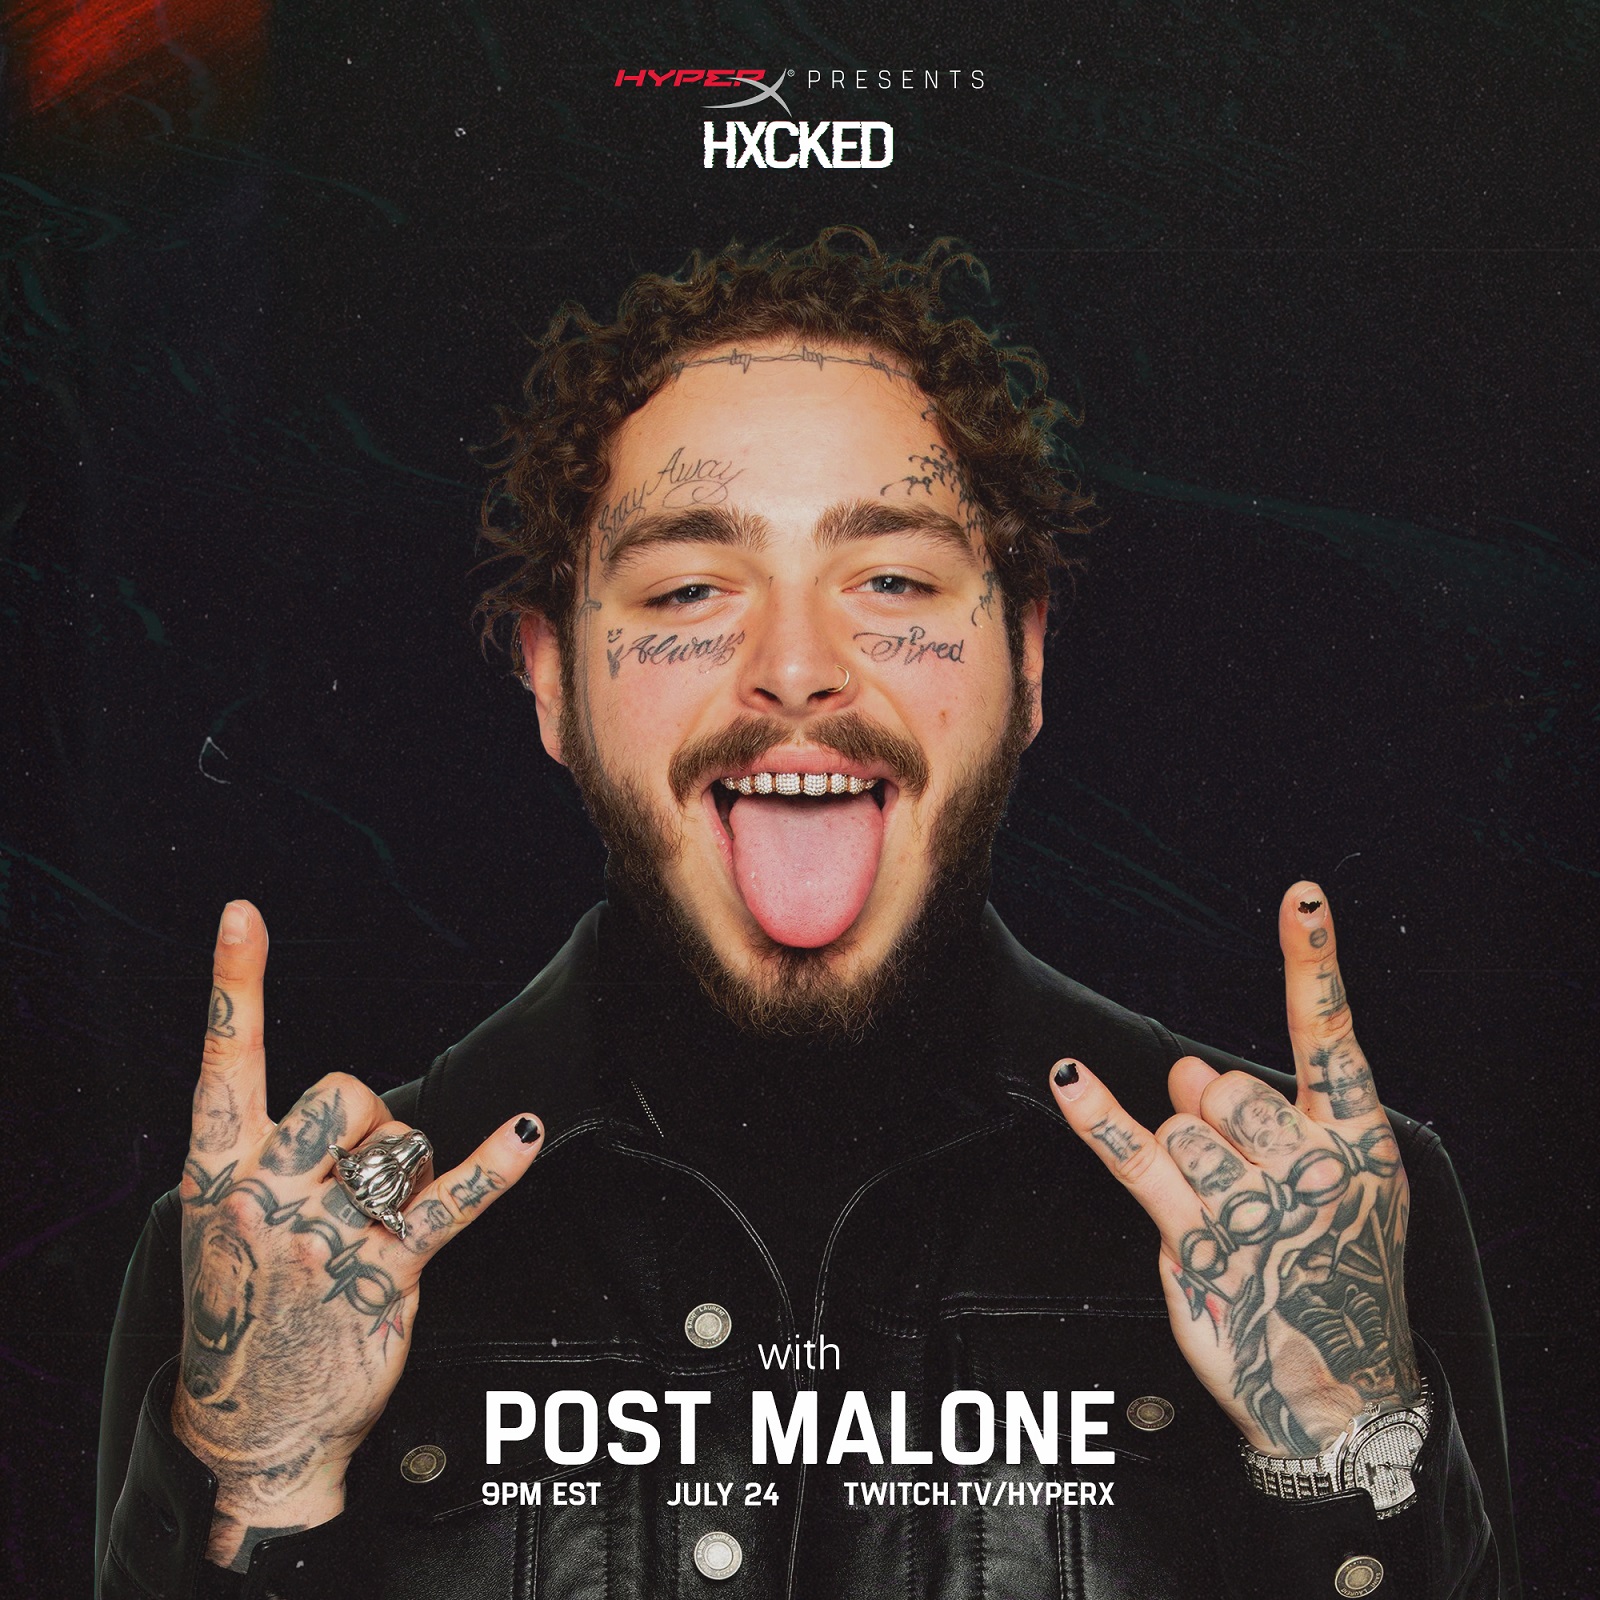 Post Malone Brings Fans Together on July 24 for Intimate Gaming Session on HyperX Twitch Channel